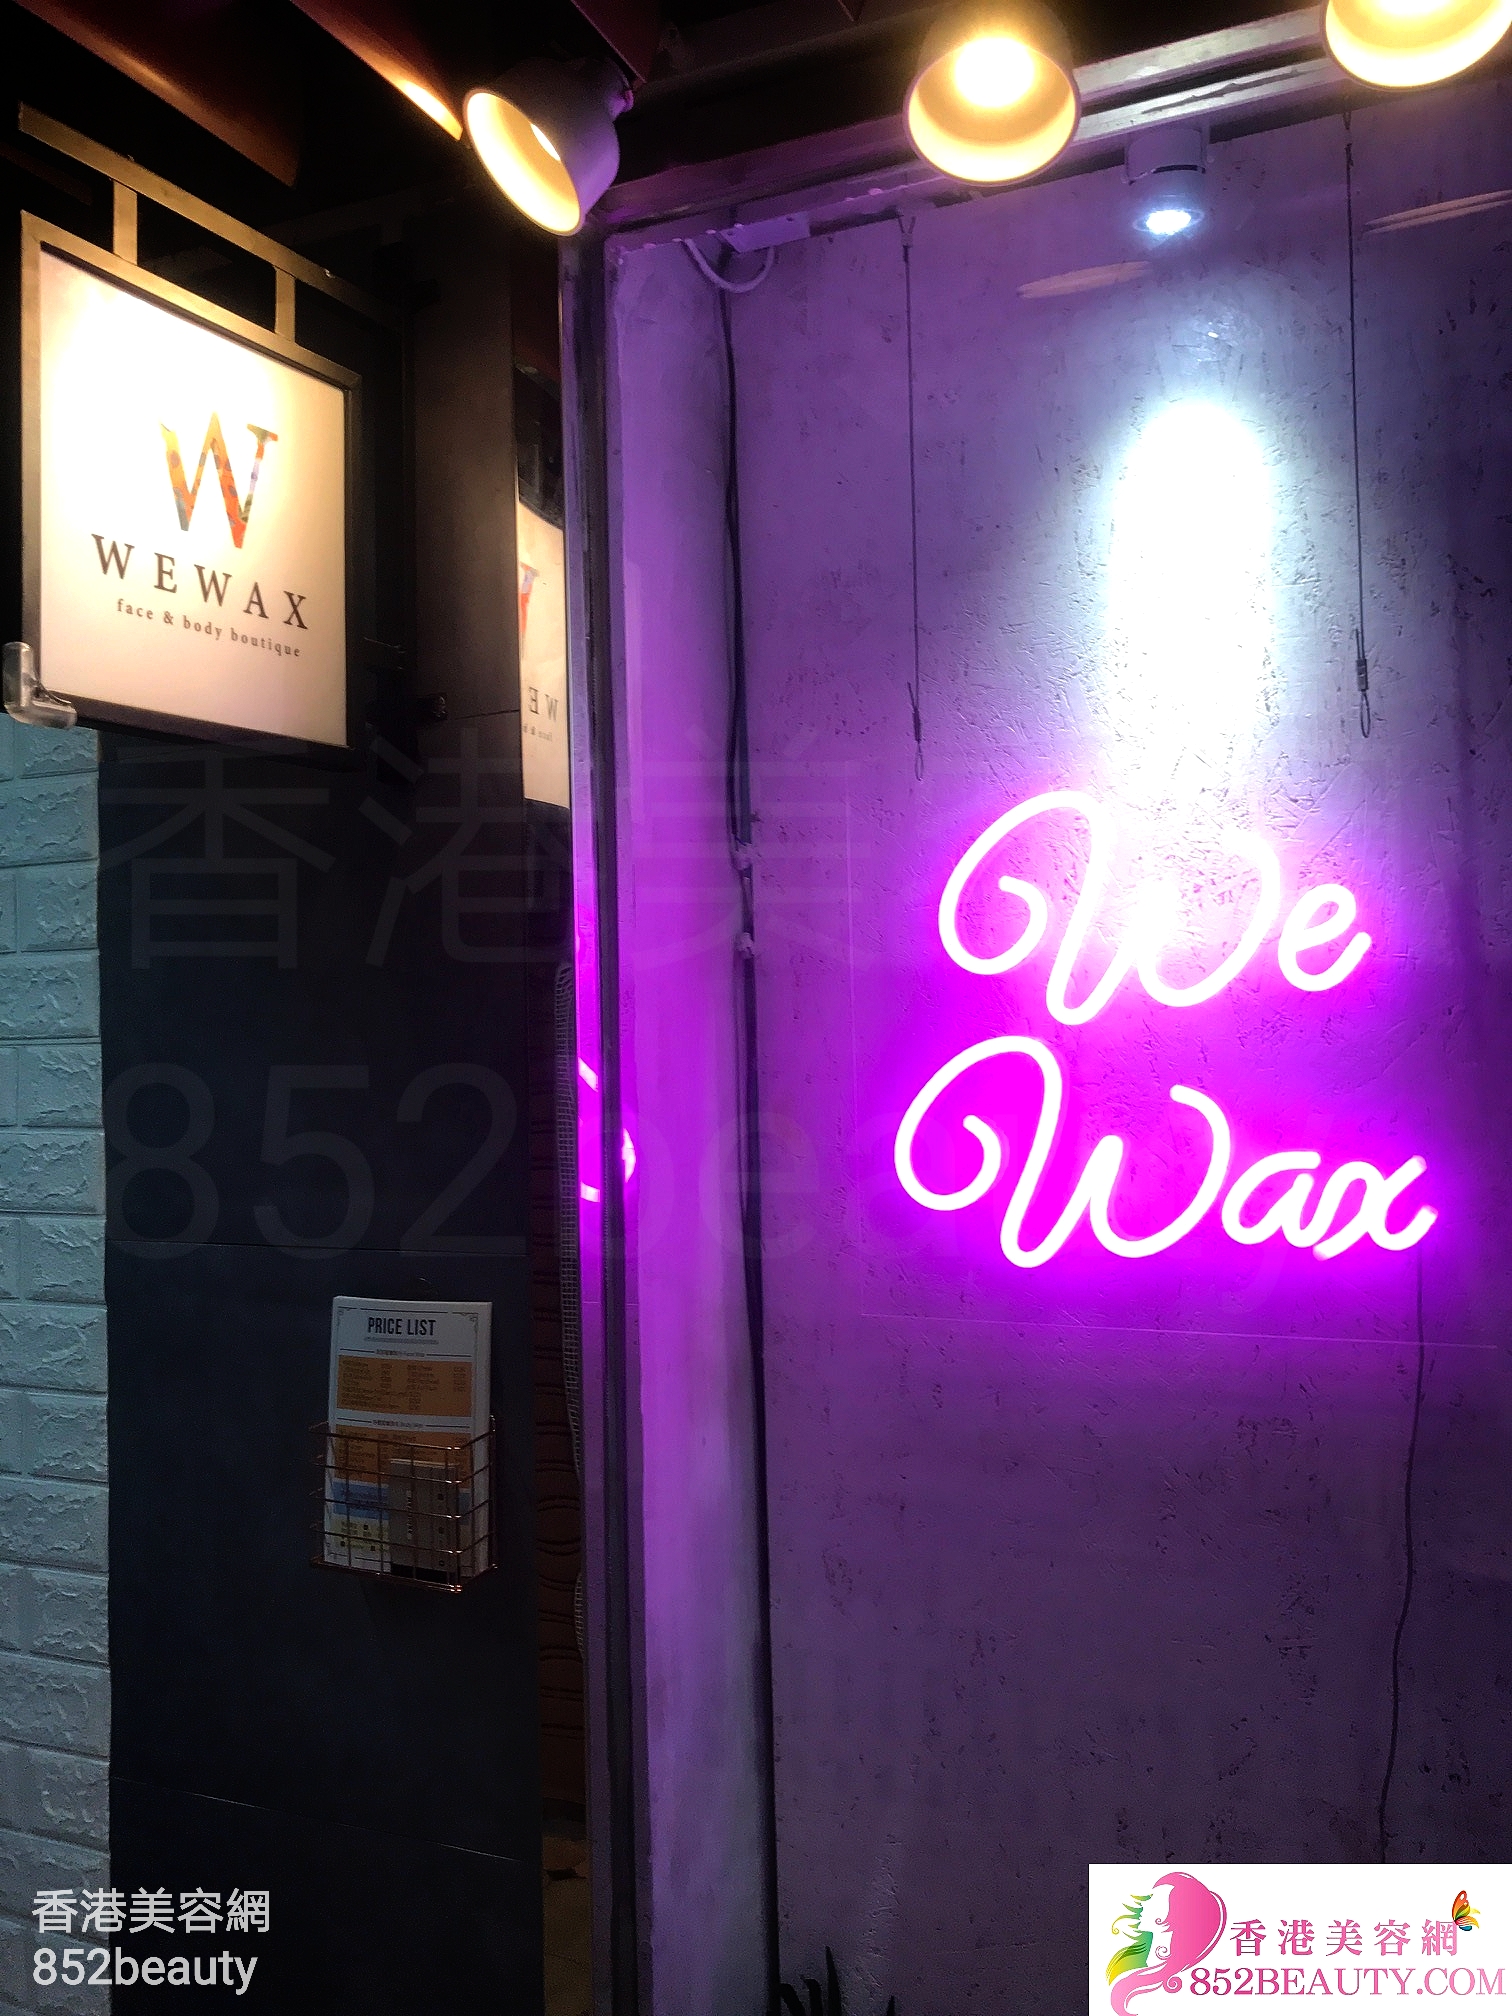 Hair Removal: WEWAX